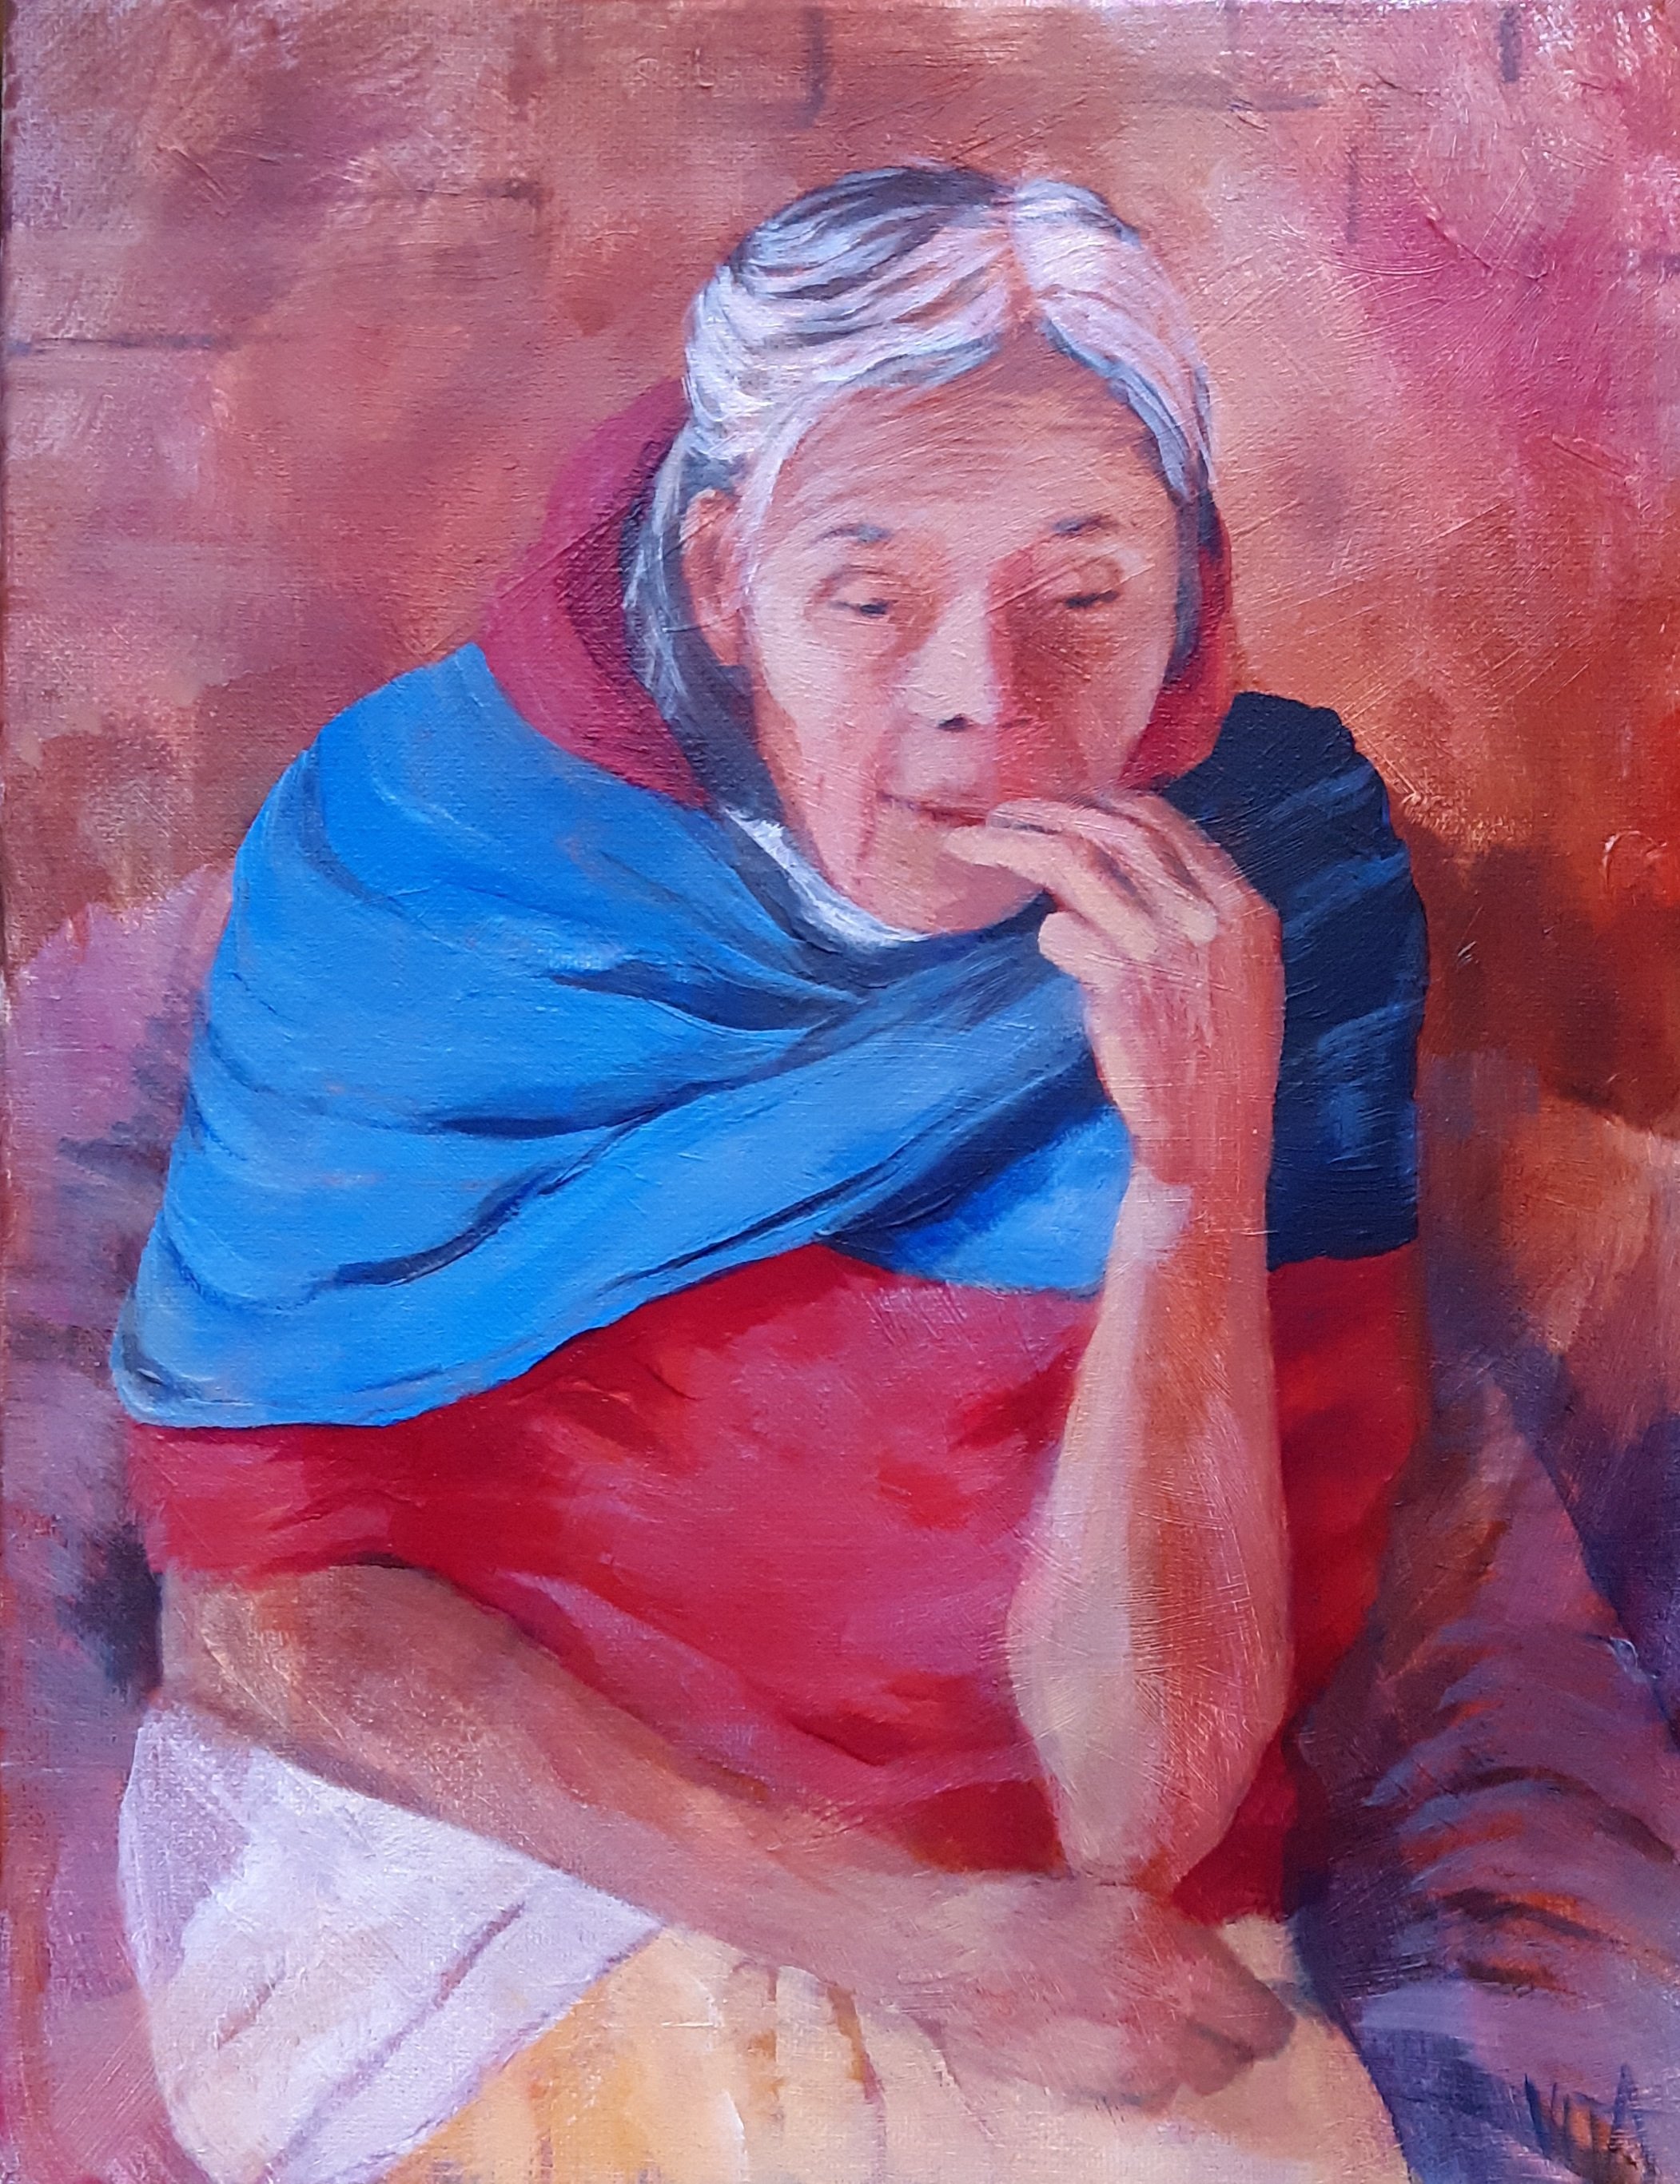 SOLD, Abuela Commission, Acrylic on Canvas, Copyright 2022 Hirschten